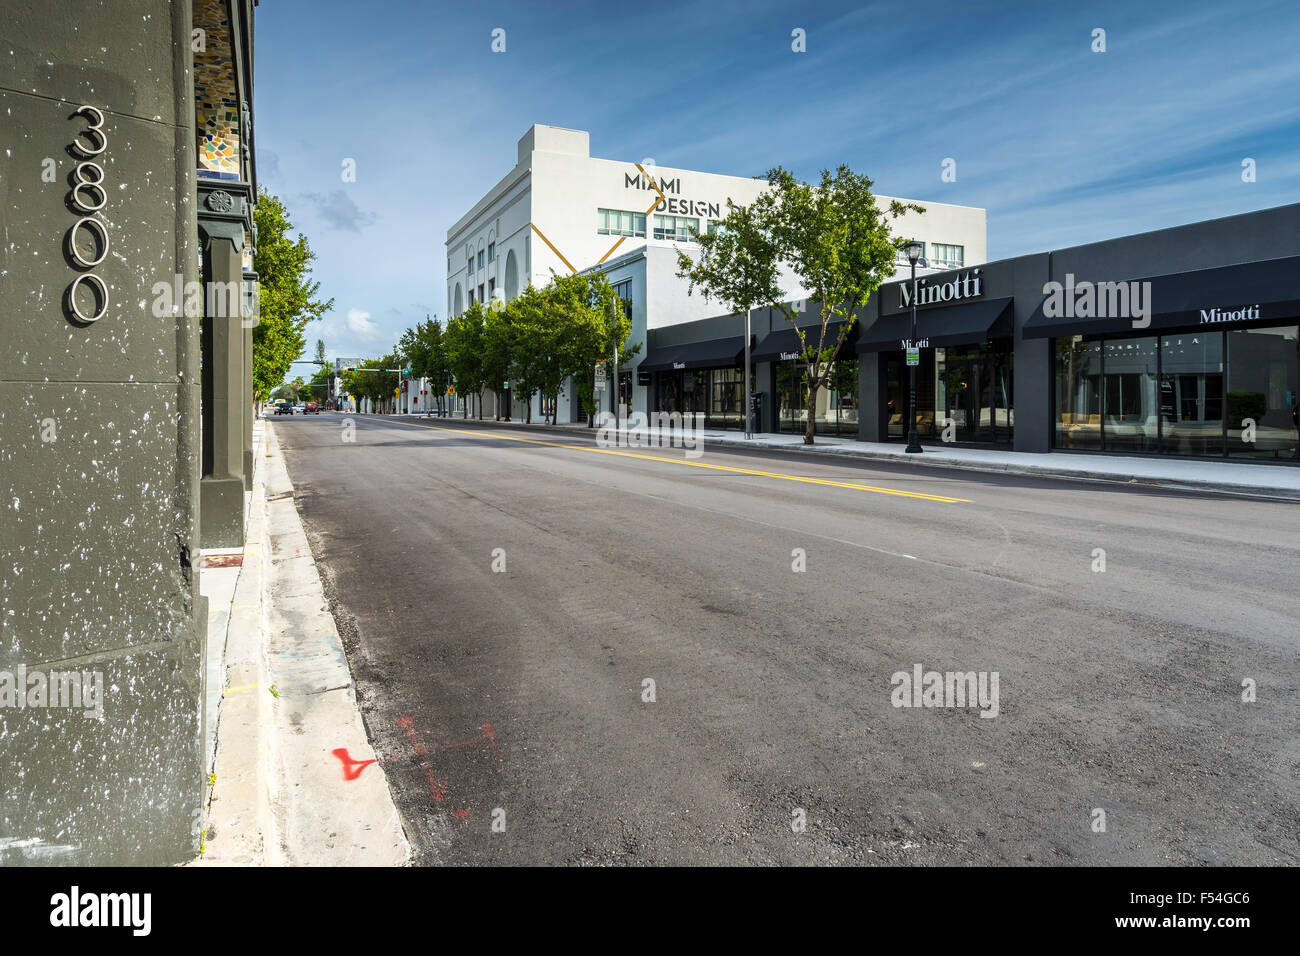 The miami design district Stock Vector Images - Alamy